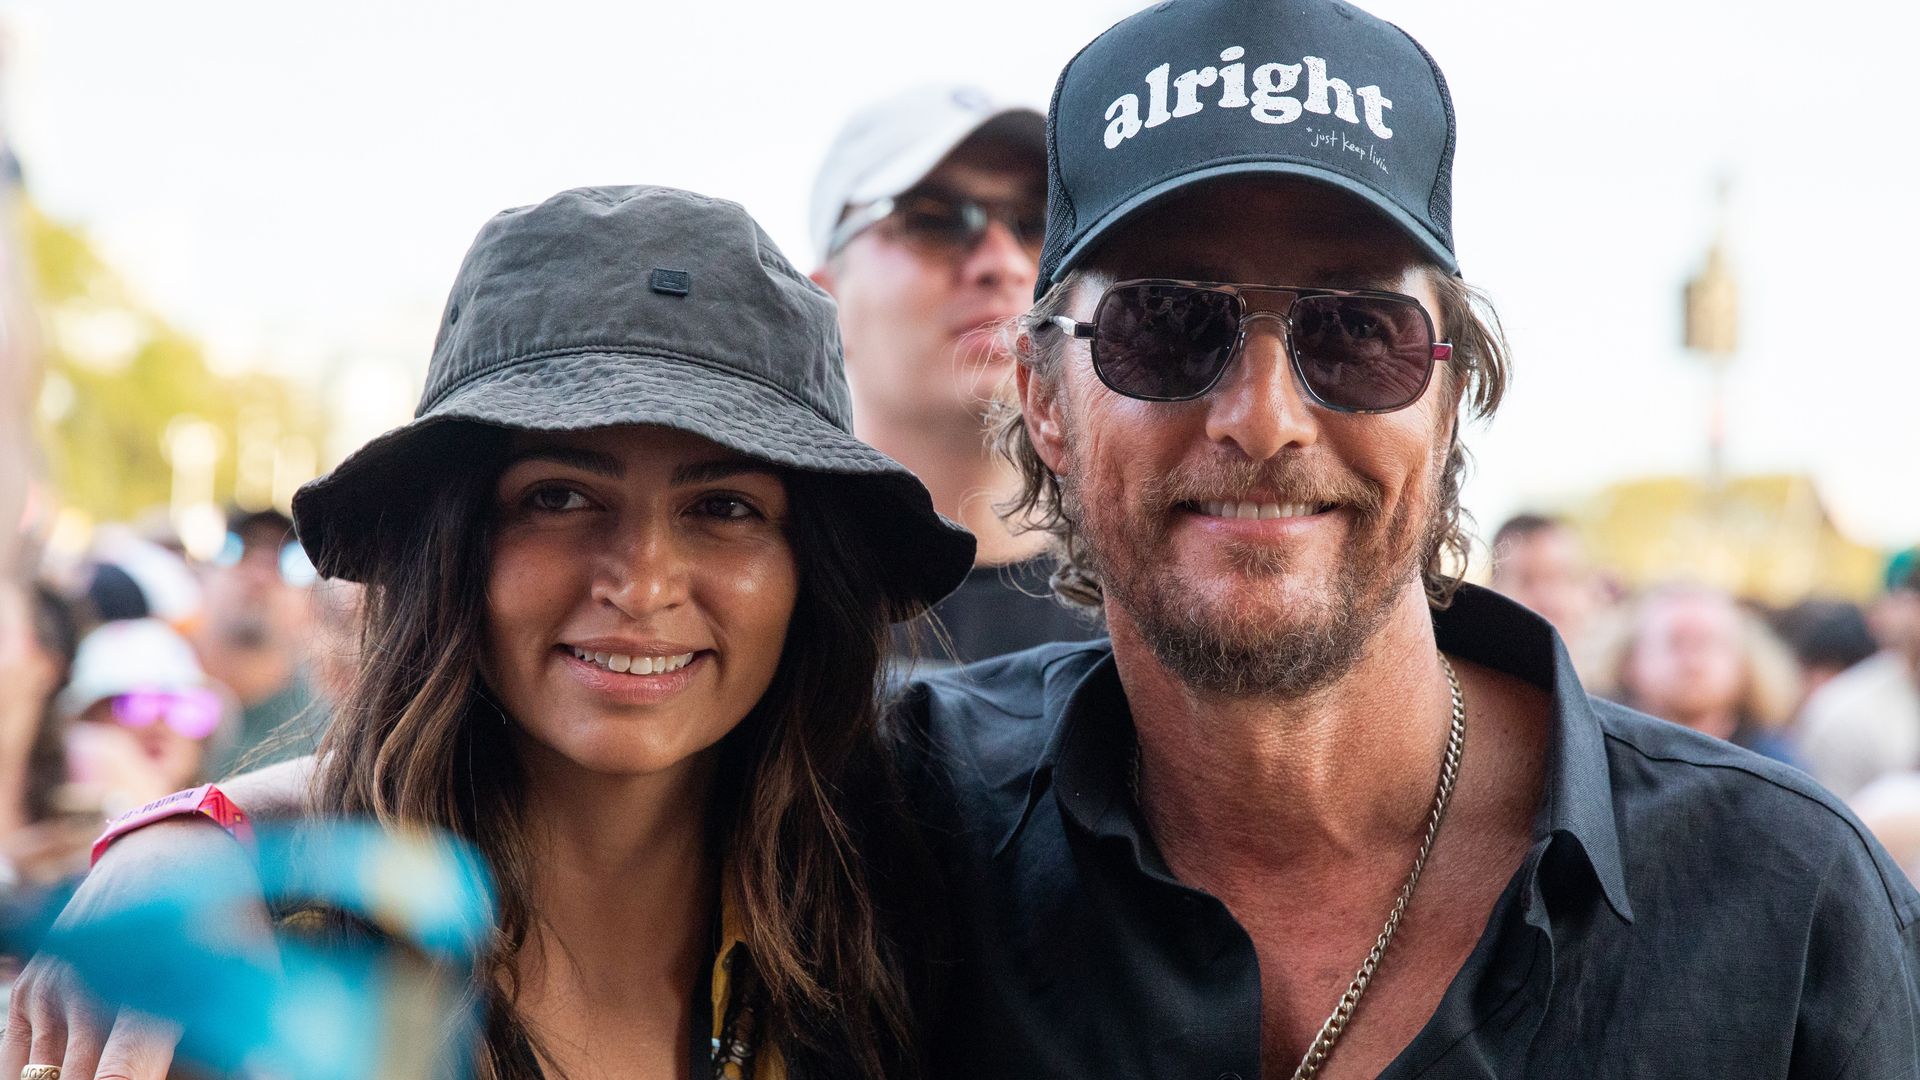 Matthew McConaughey and wife Camila command attention from fans as they let loose in Austin: wild photos